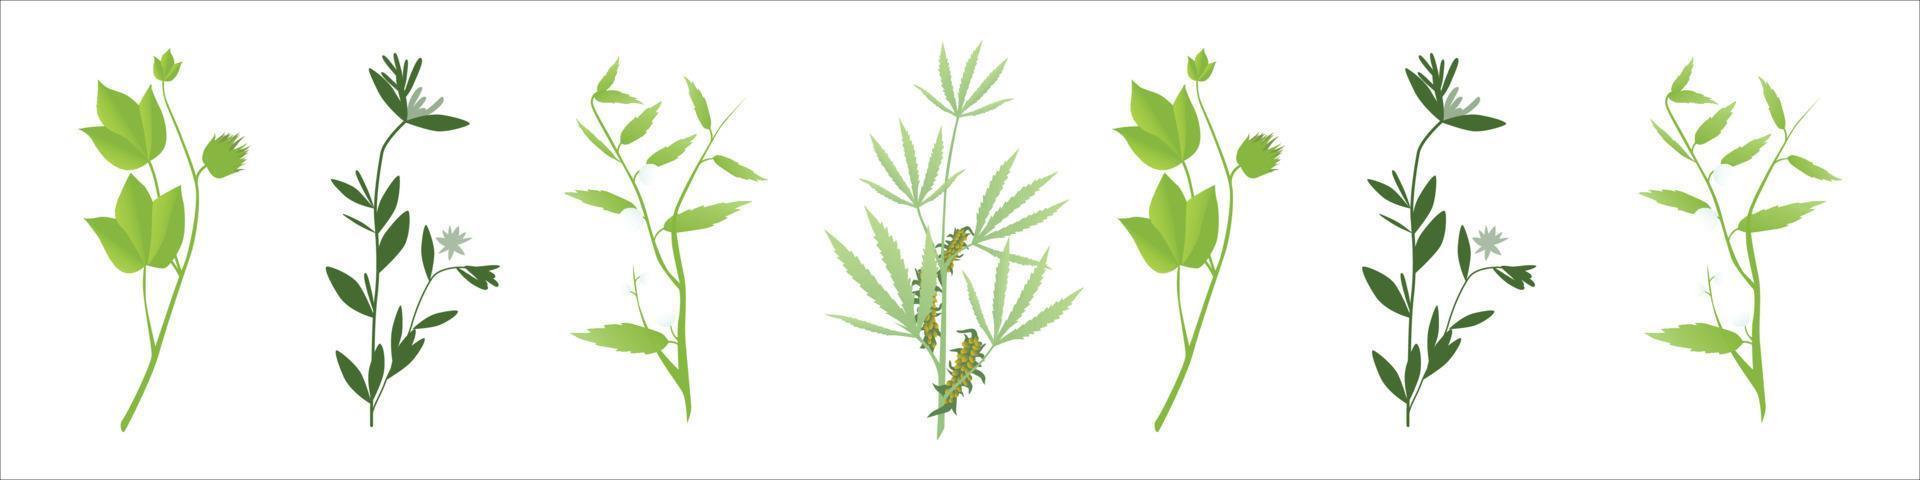 Astringent herbs vector illustration collection. Natural homeopathy wild plants botanic set.